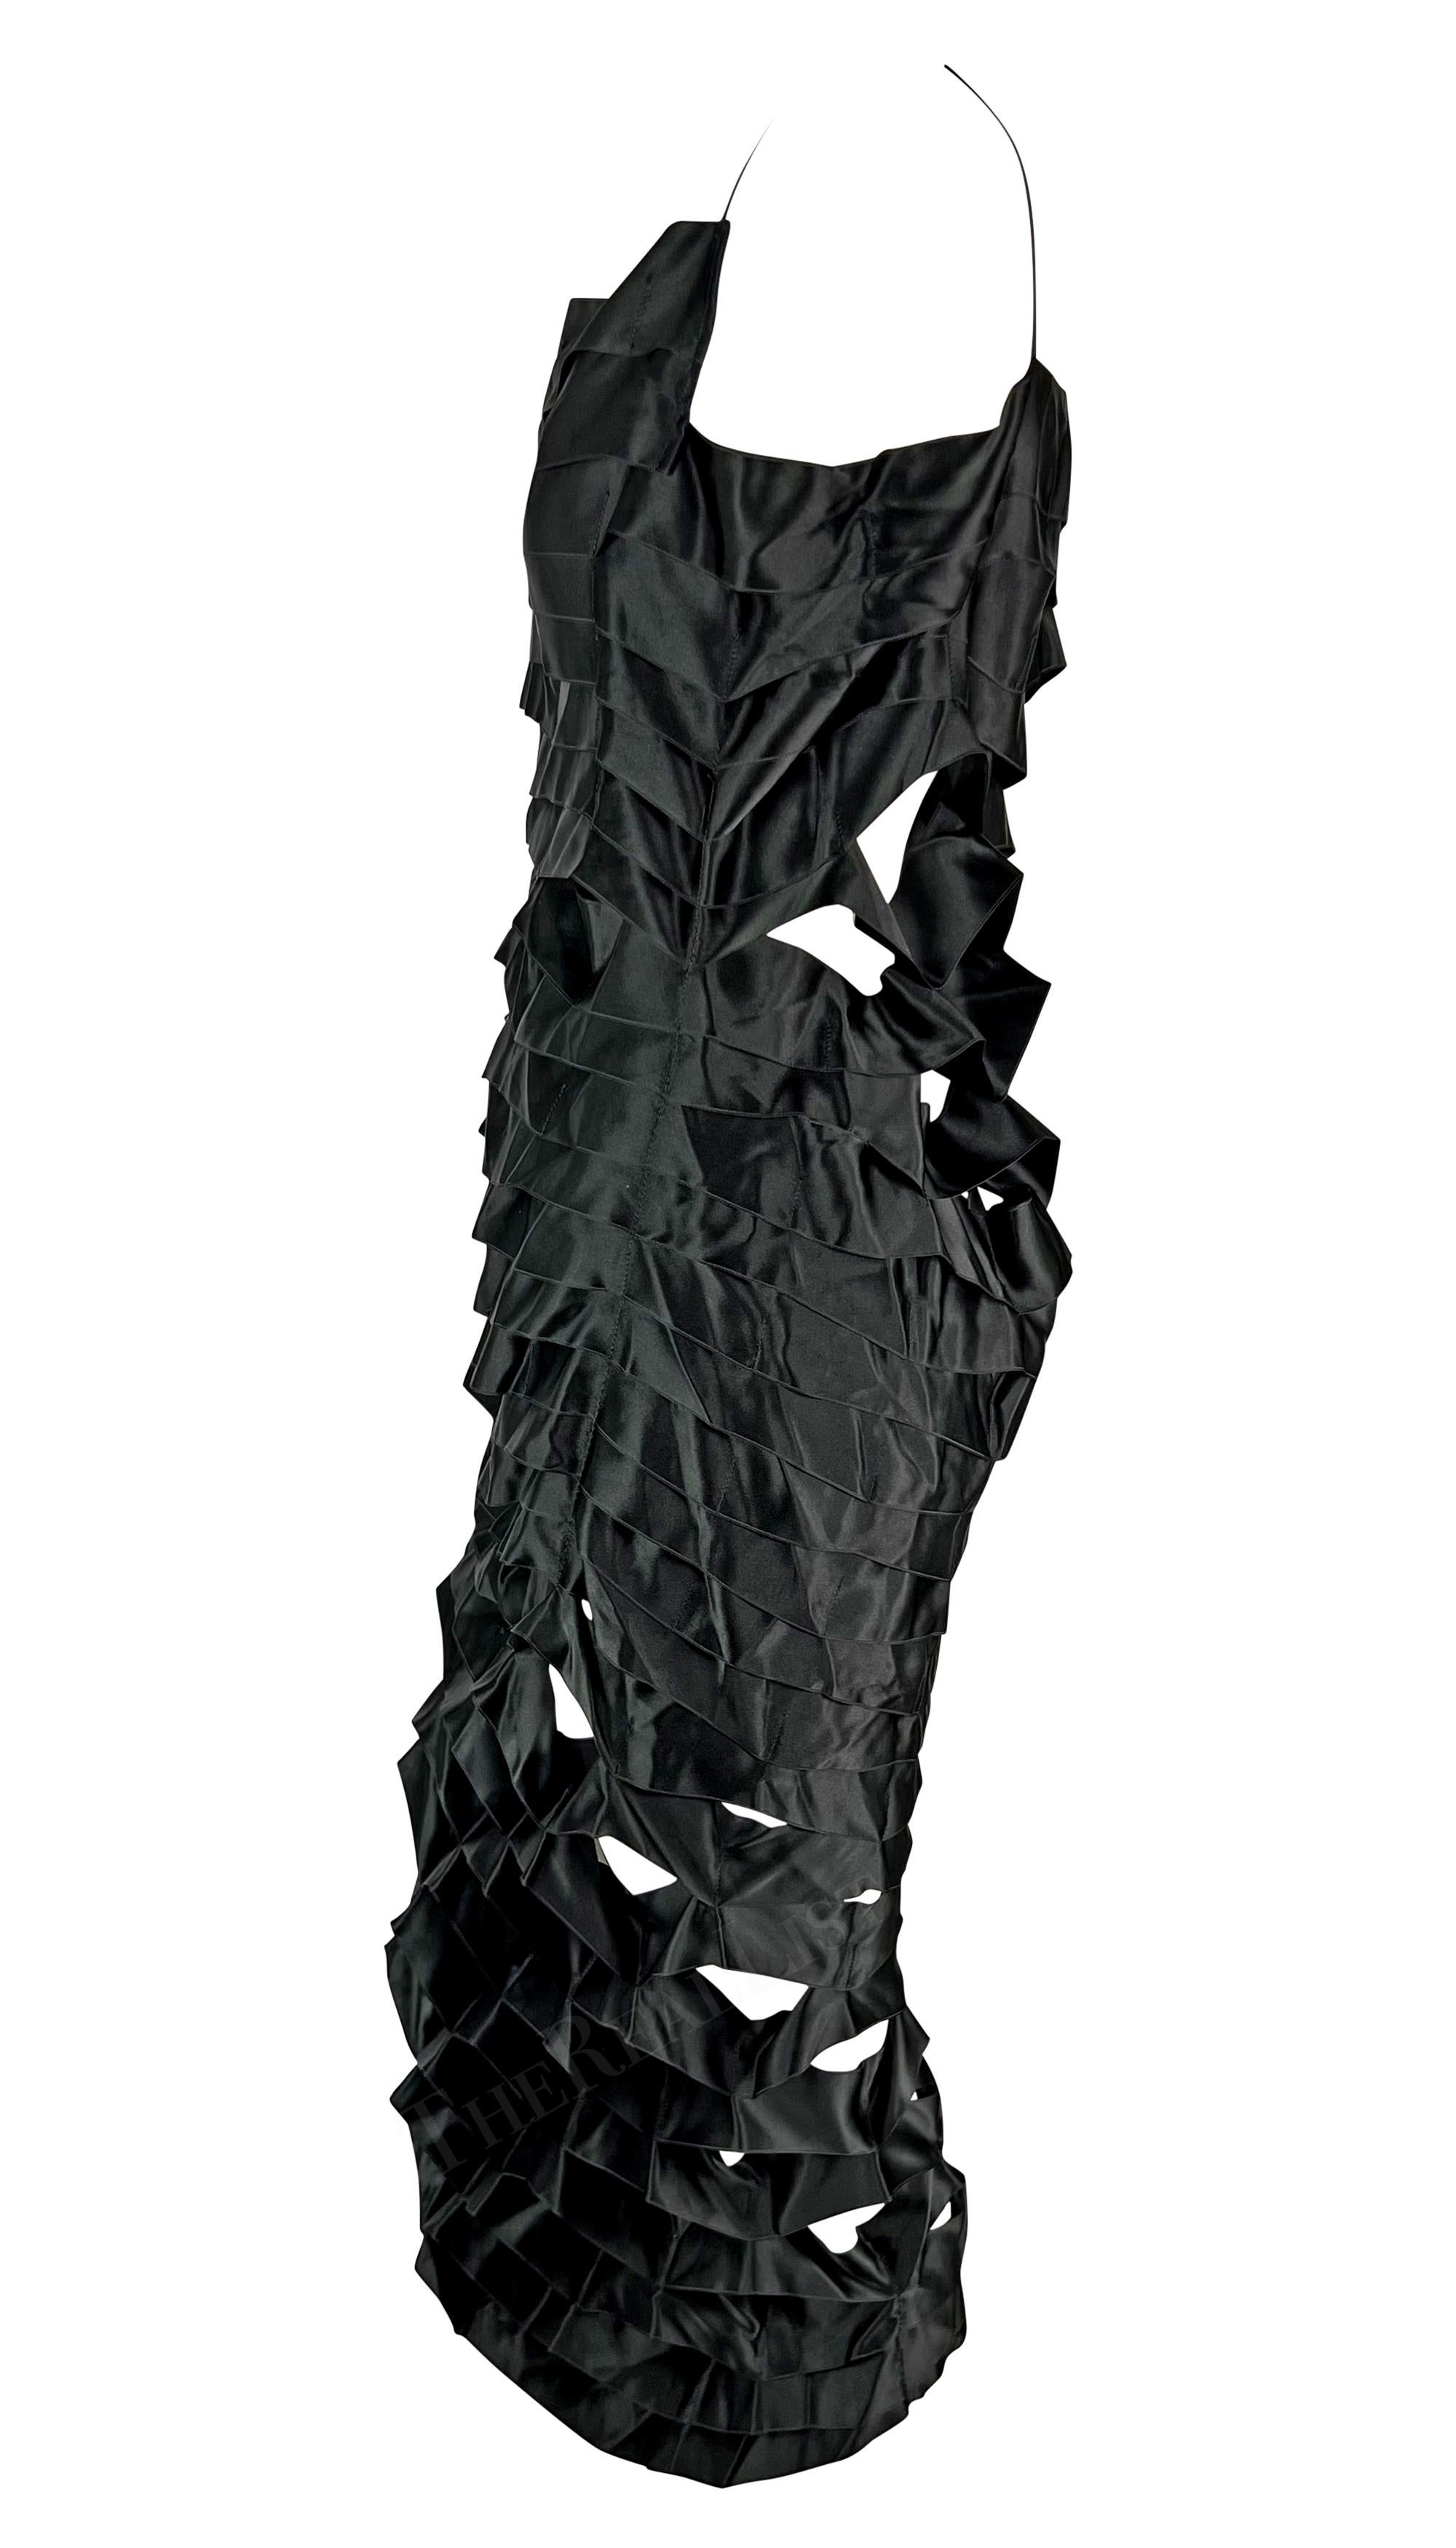 S/S 1998 Helmut Lang Black Silk Cut Out Ribbon Runway Gown  For Sale 4